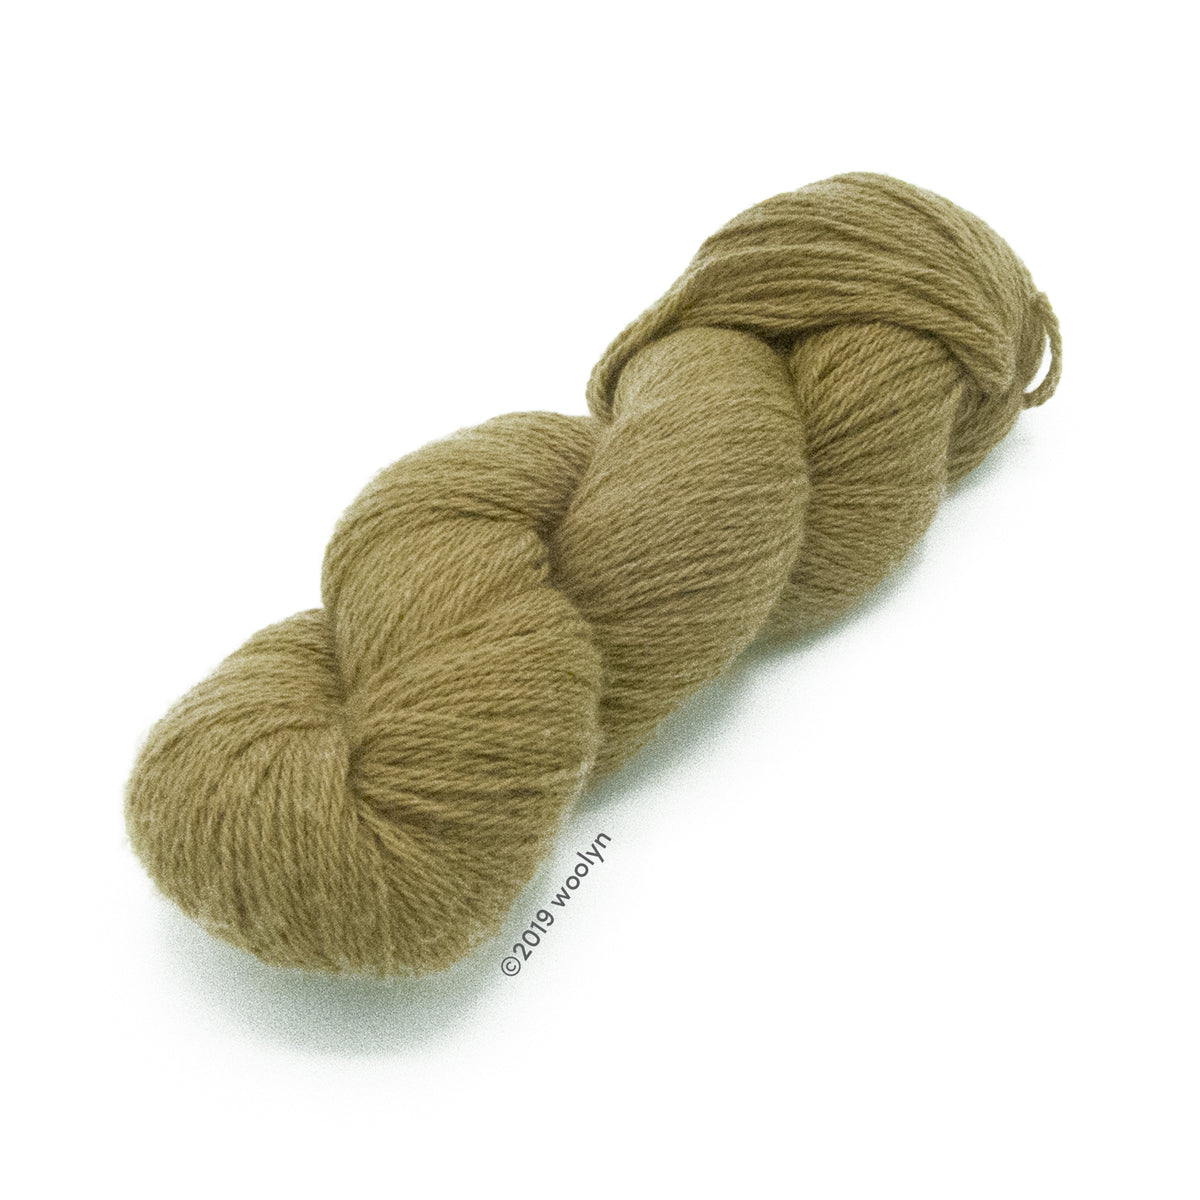 North Light Fibers Spring St in Mohegan, a beige color.